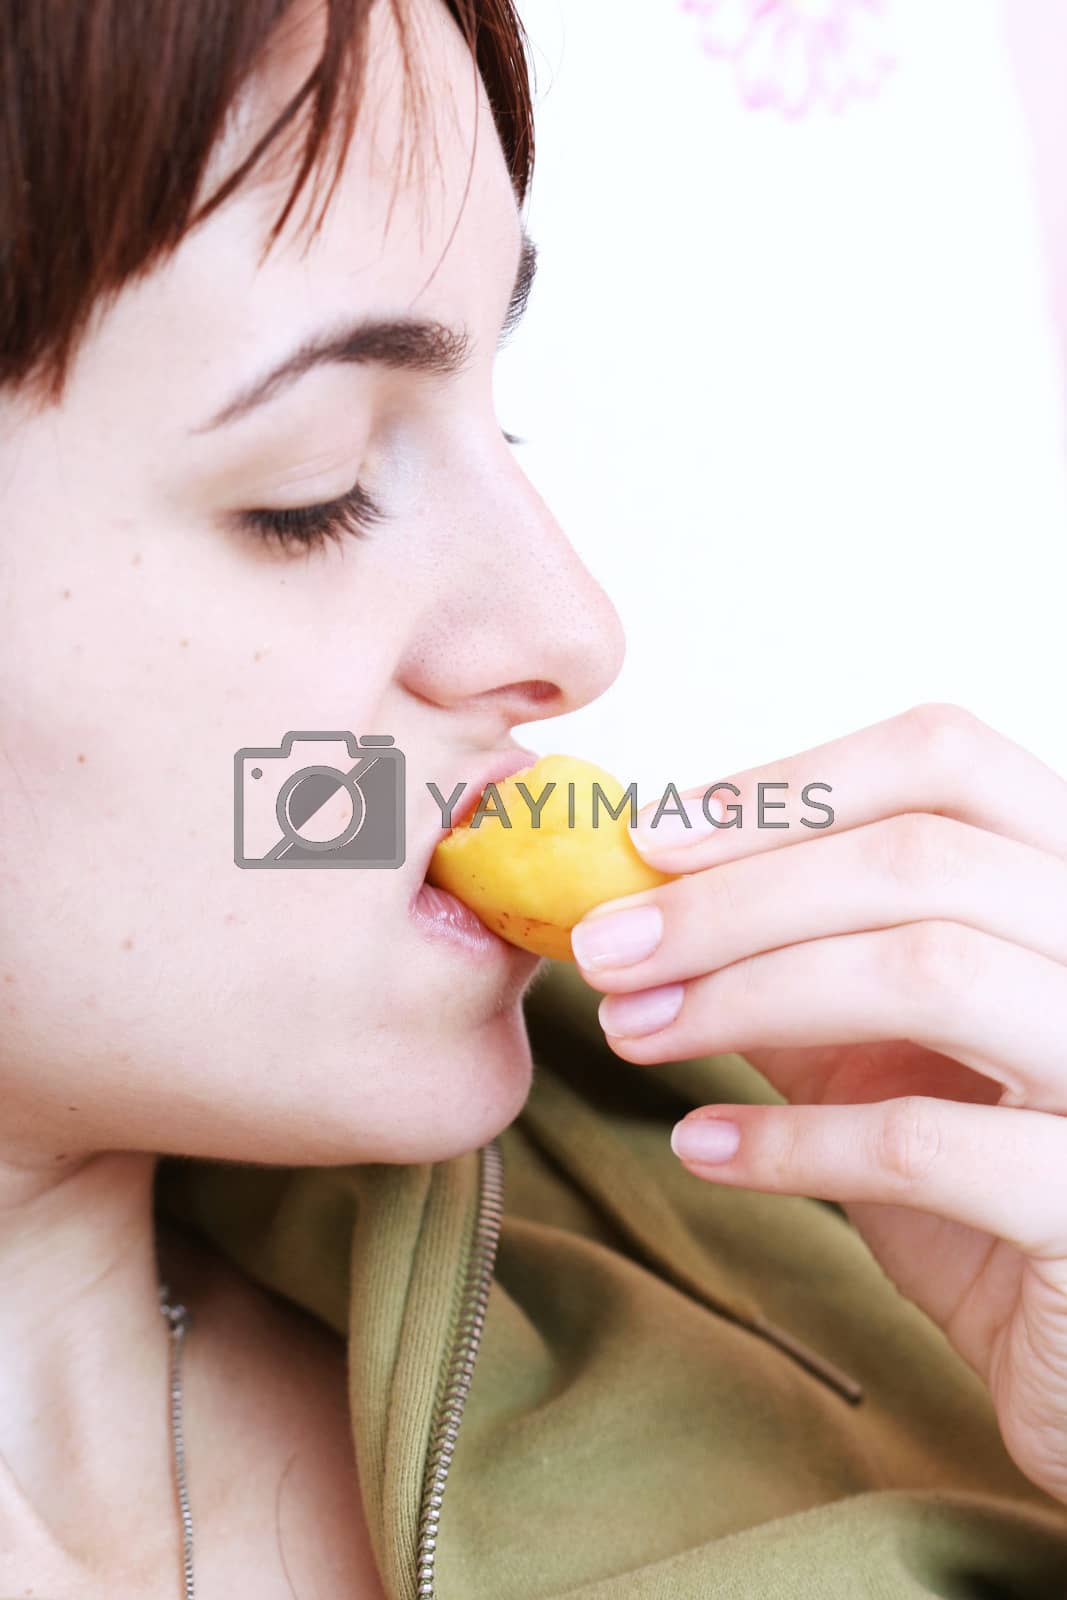 Royalty free image of Women with apricot  by arosoft